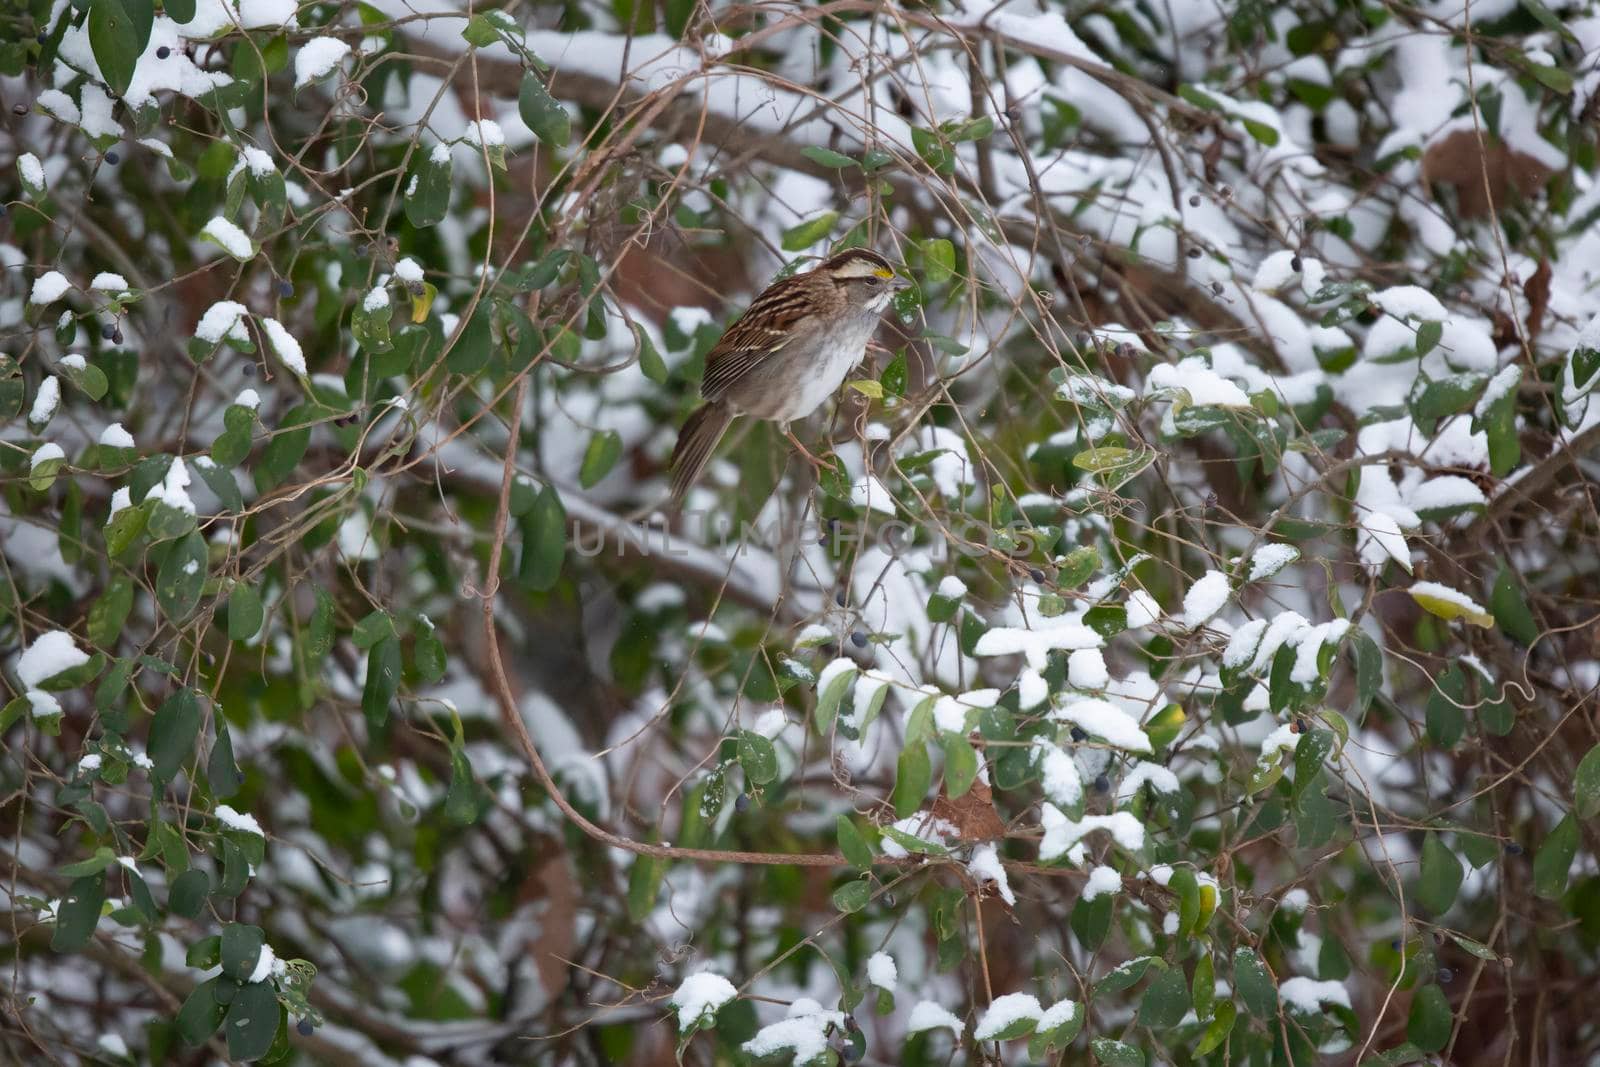 White-throated sparrow (Zonotrichia albicollis) eating a purple berry on a snow-covered bush